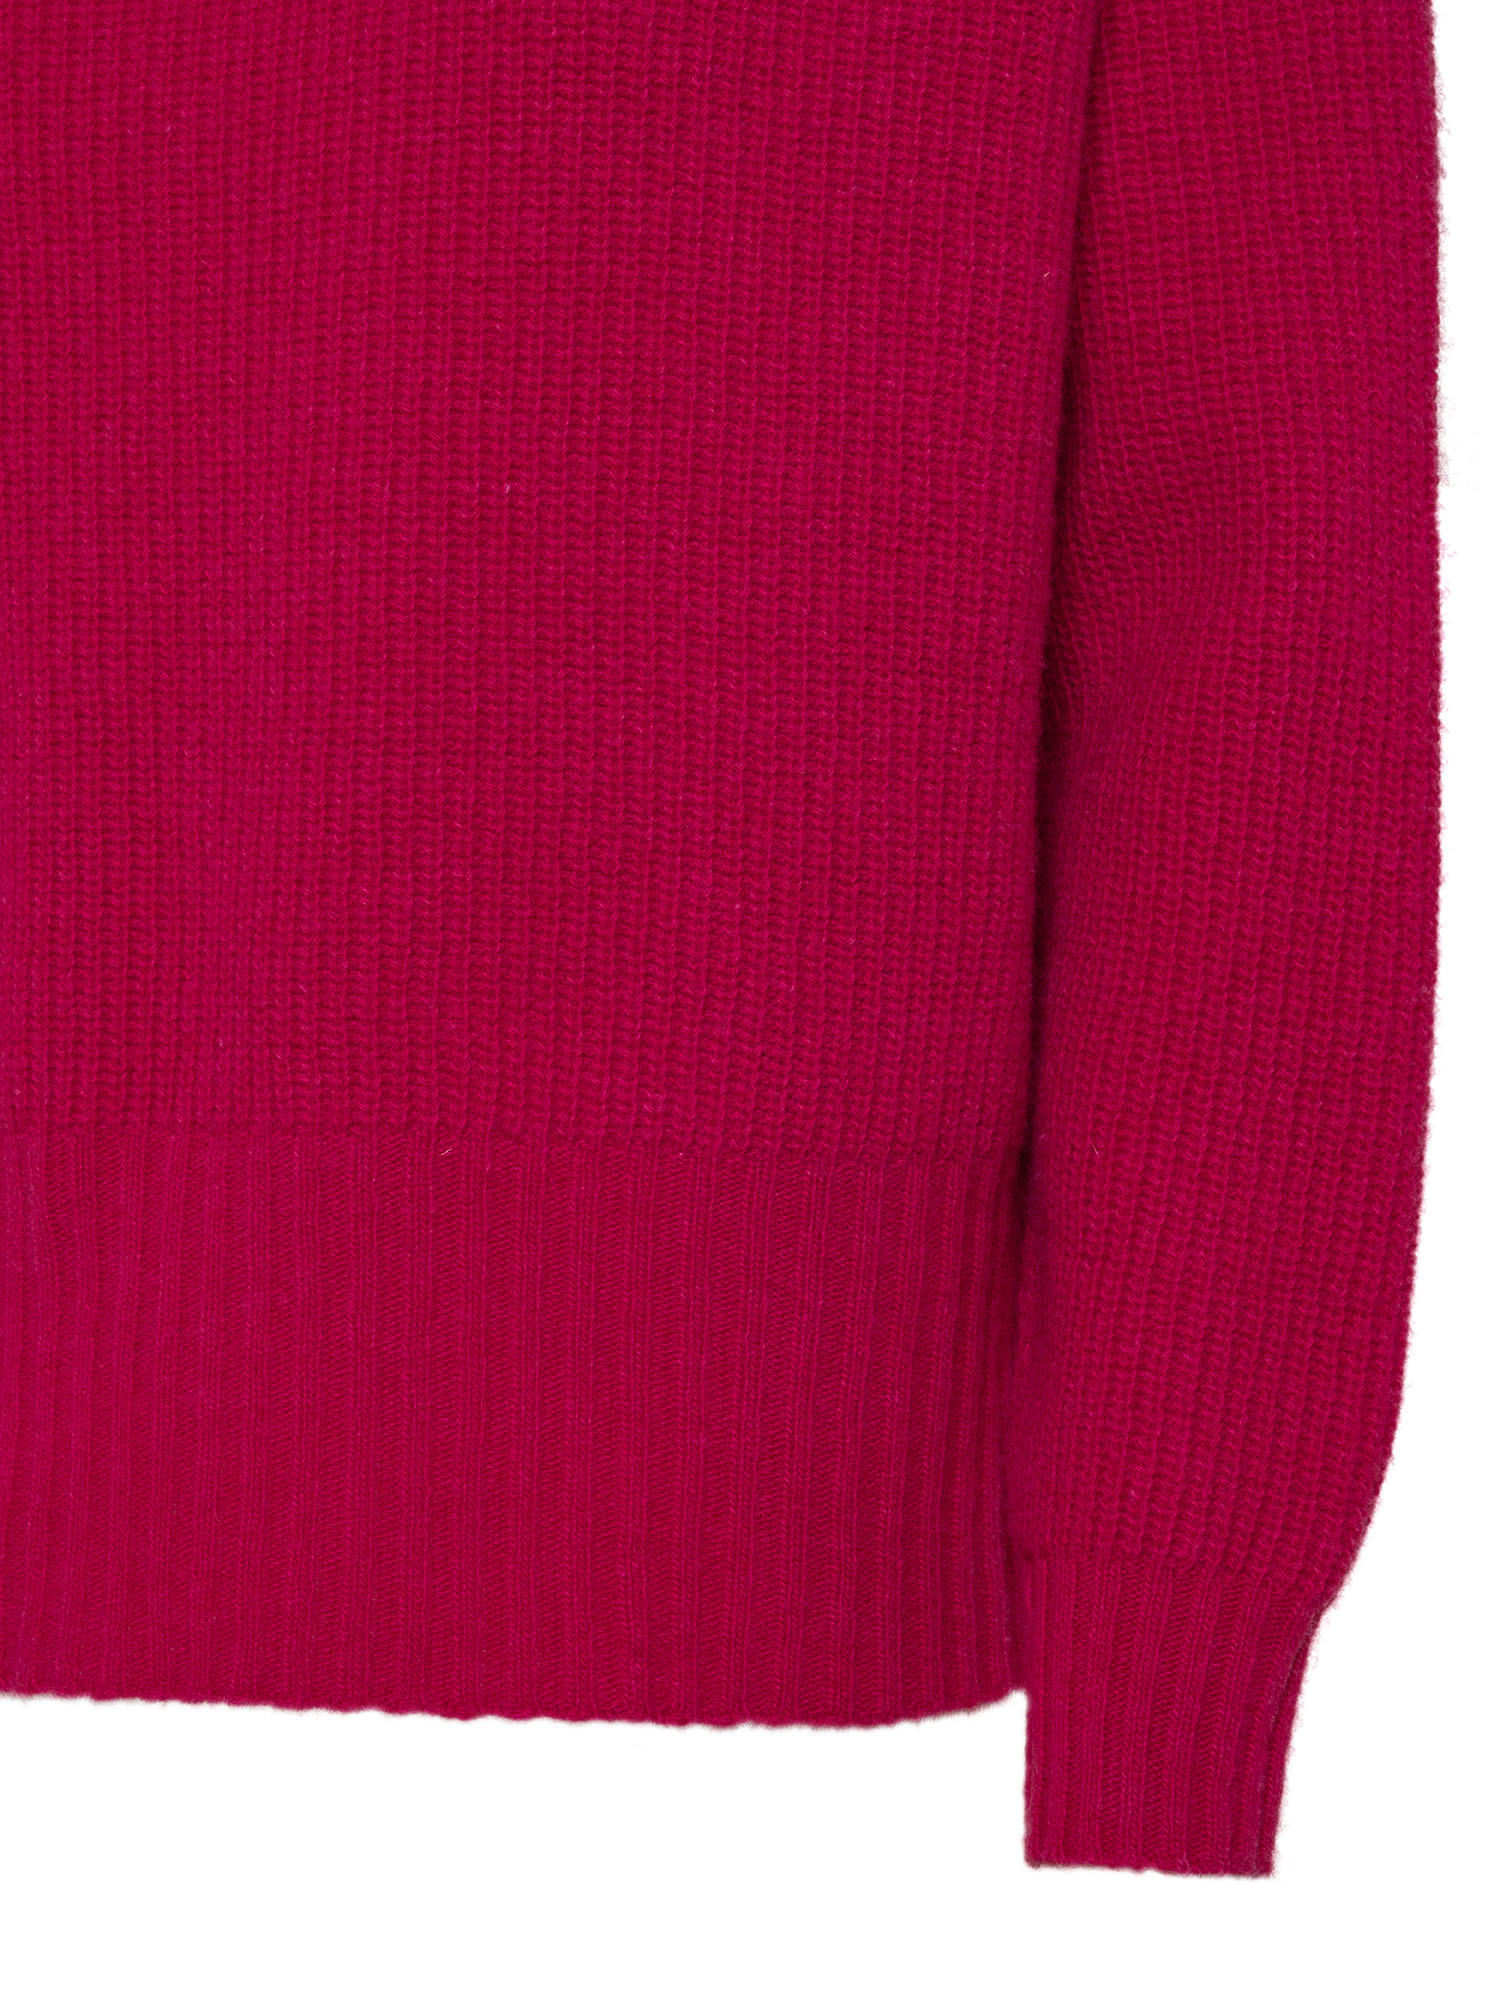 K Collection - Pullover dolcevita in lana cardata, Rosa fuxia, large image number 2